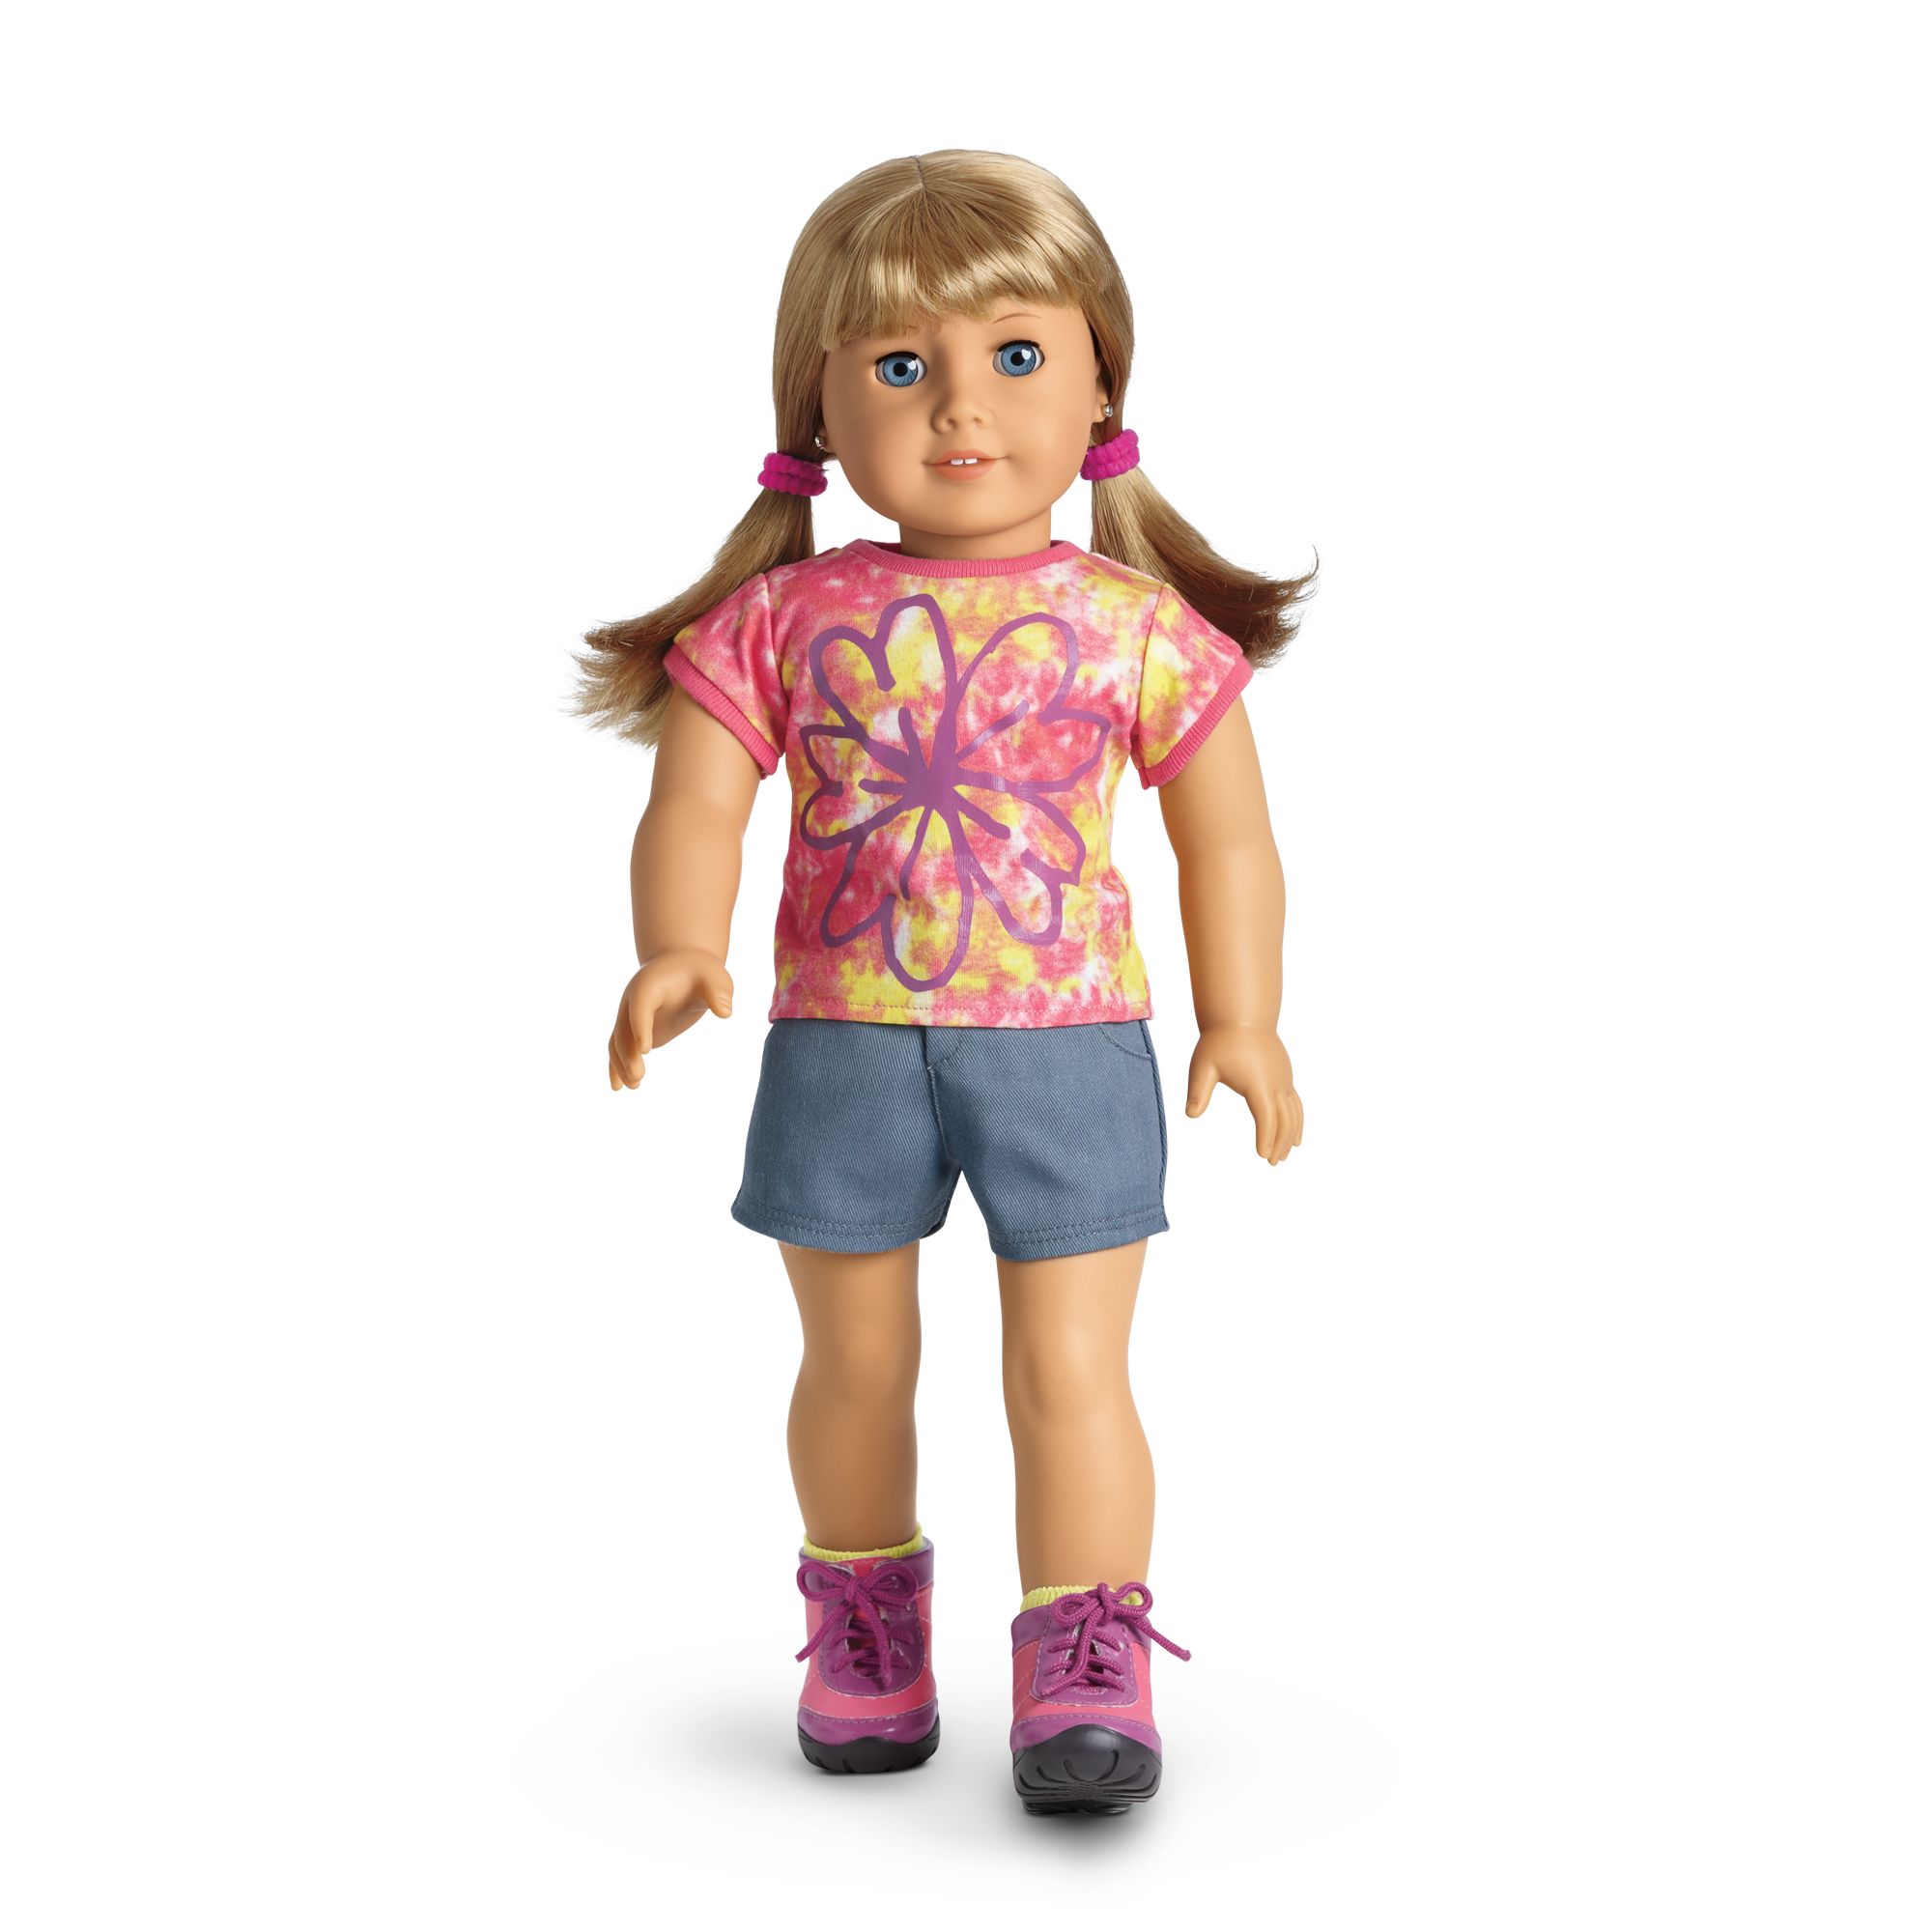 Star Hoodie Outfit, American Girl Wiki